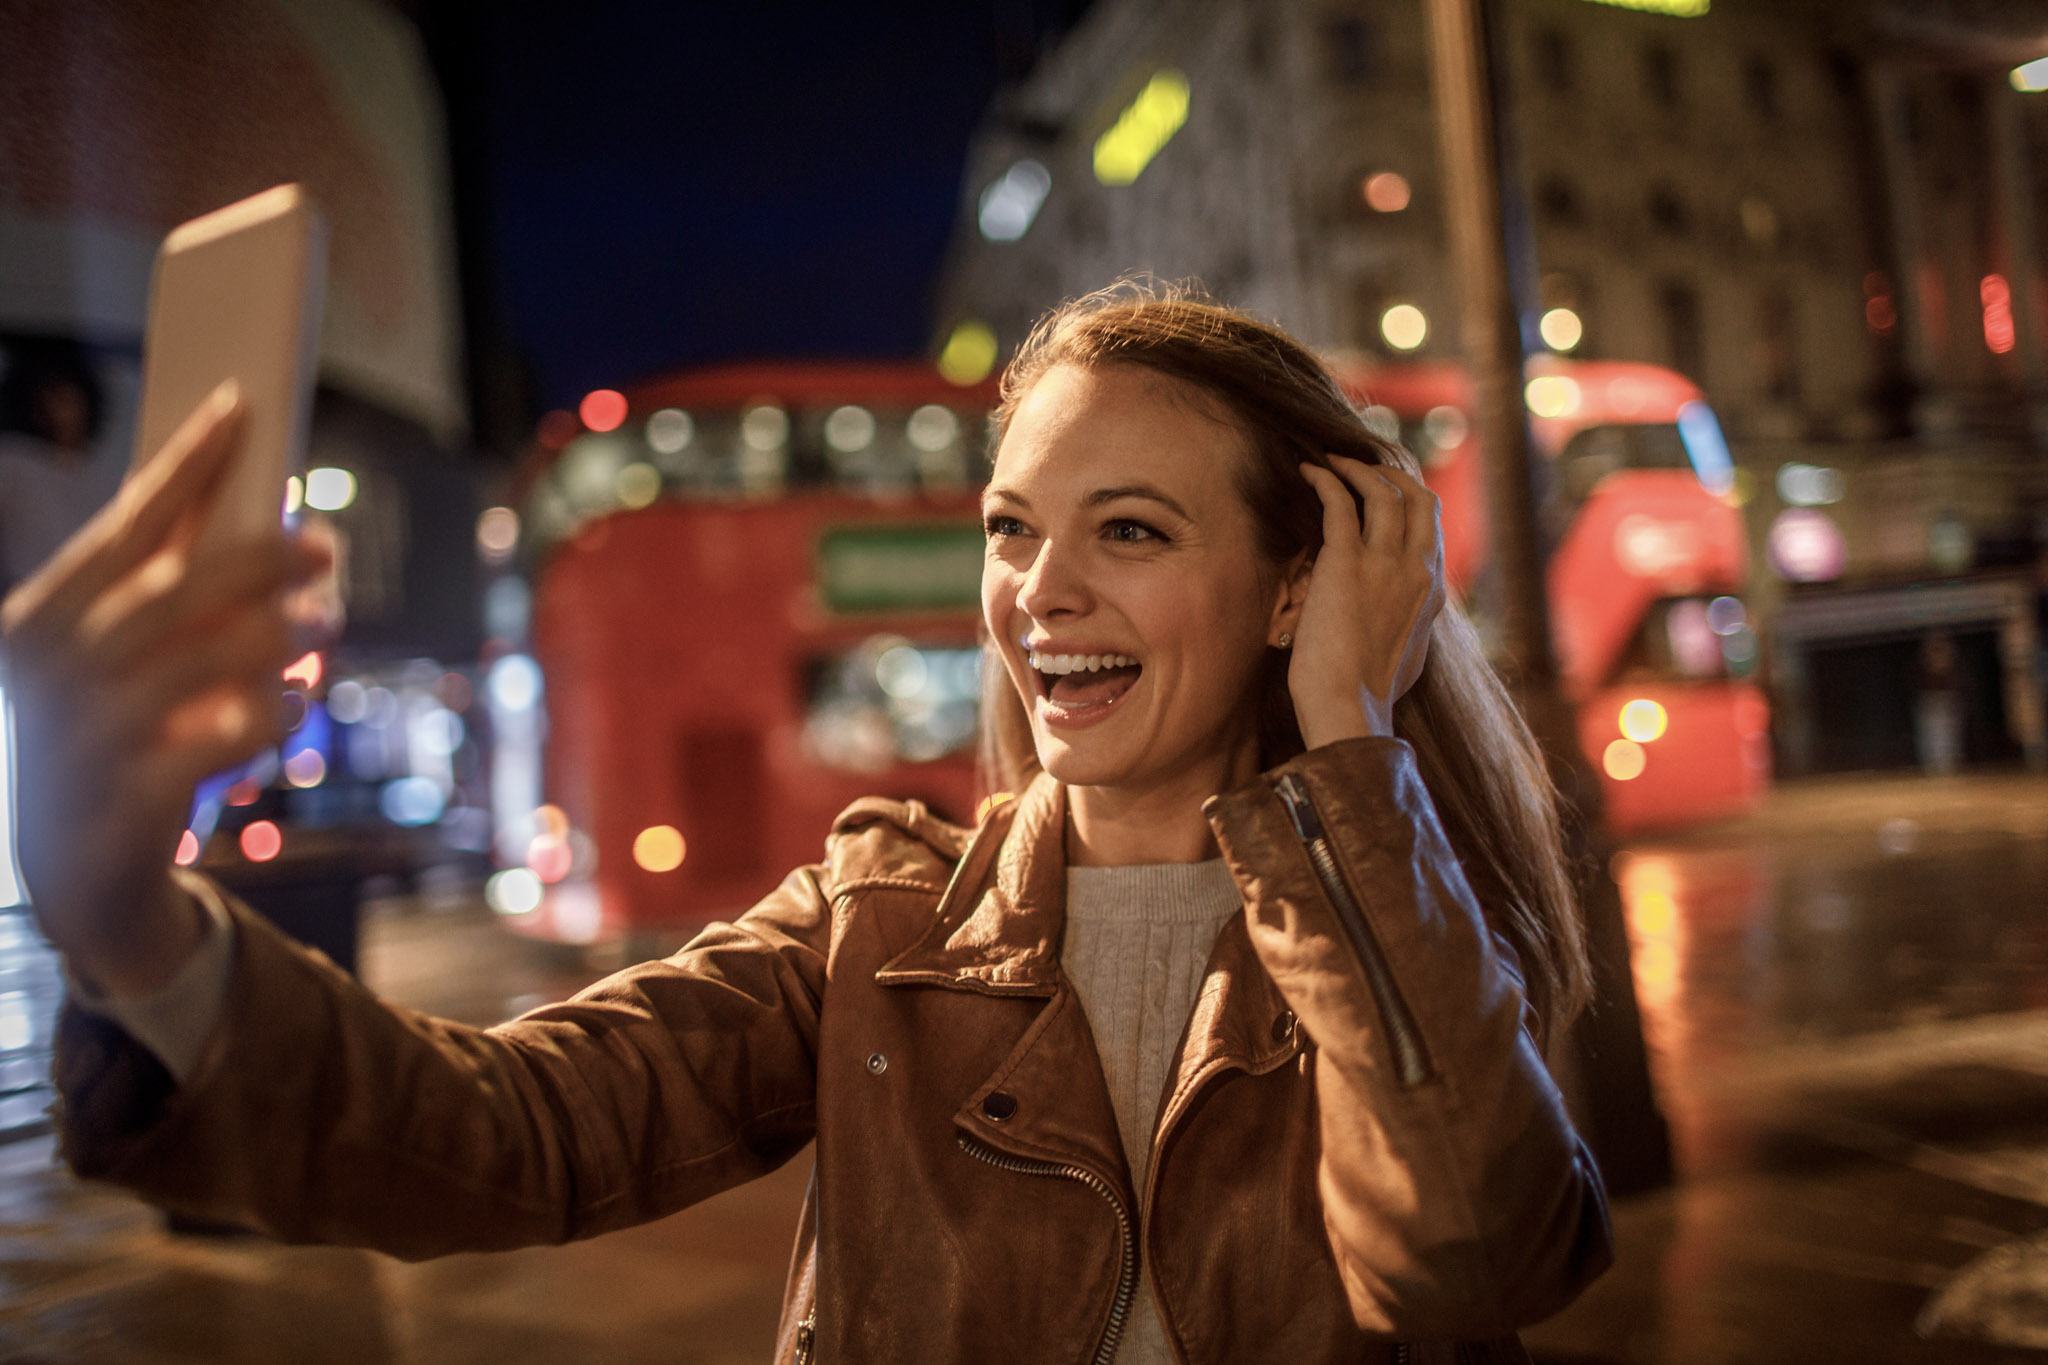 stock photo of a young woman taking a selfie at night in London with a red double decker bus passing by behind her